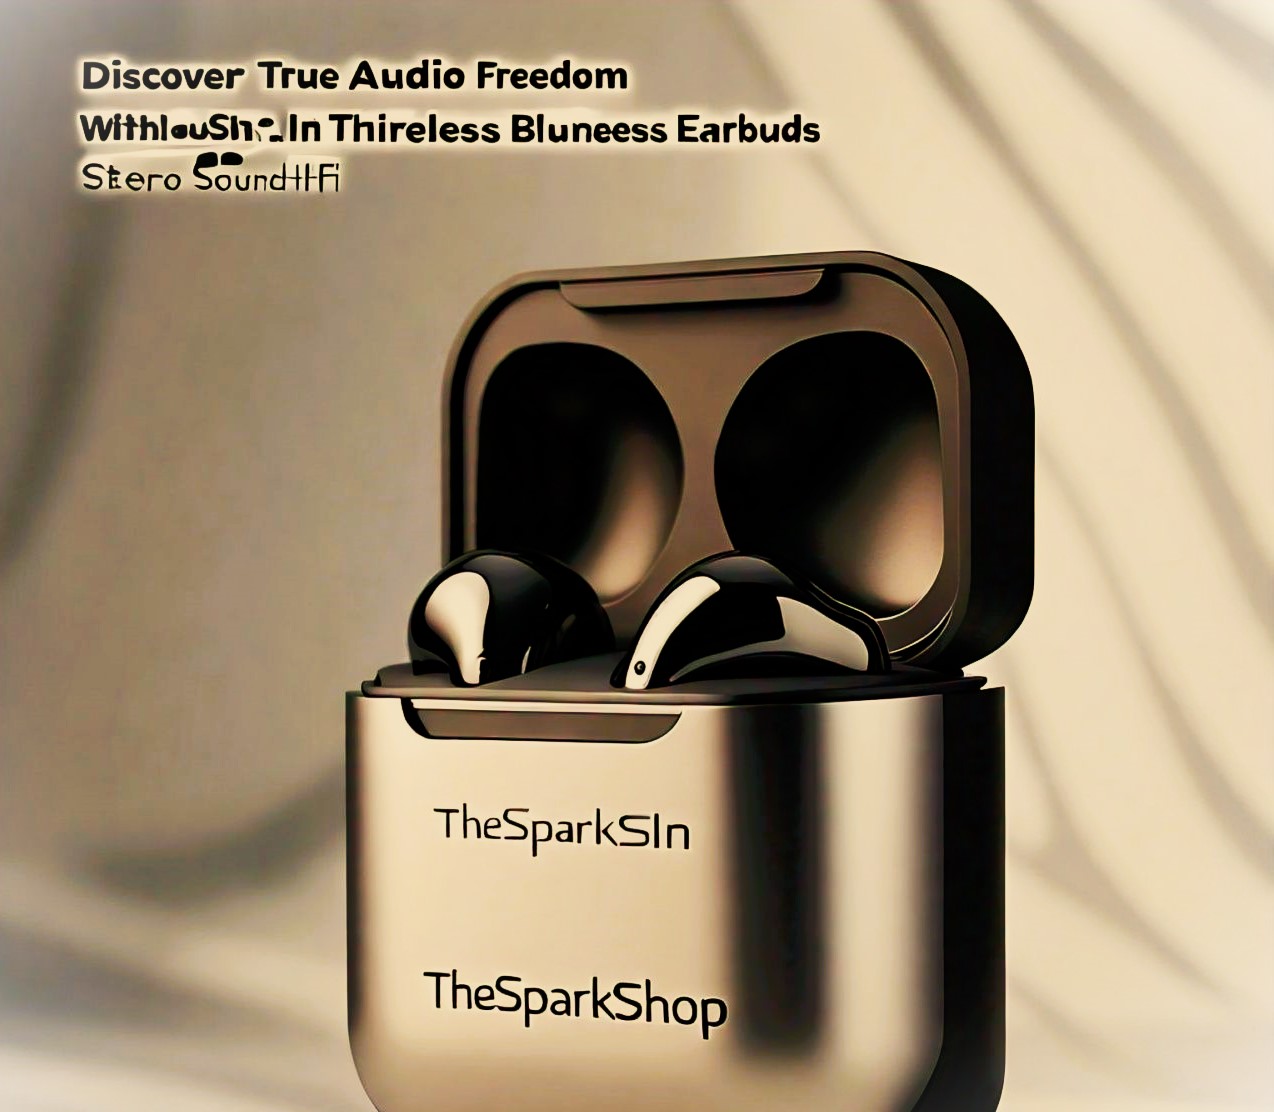 Discover True Audio Freedom With Thesparkshop.In Wireless Earbuds Bluetooth 5-0-8d Stereo Sound Hi-Fi